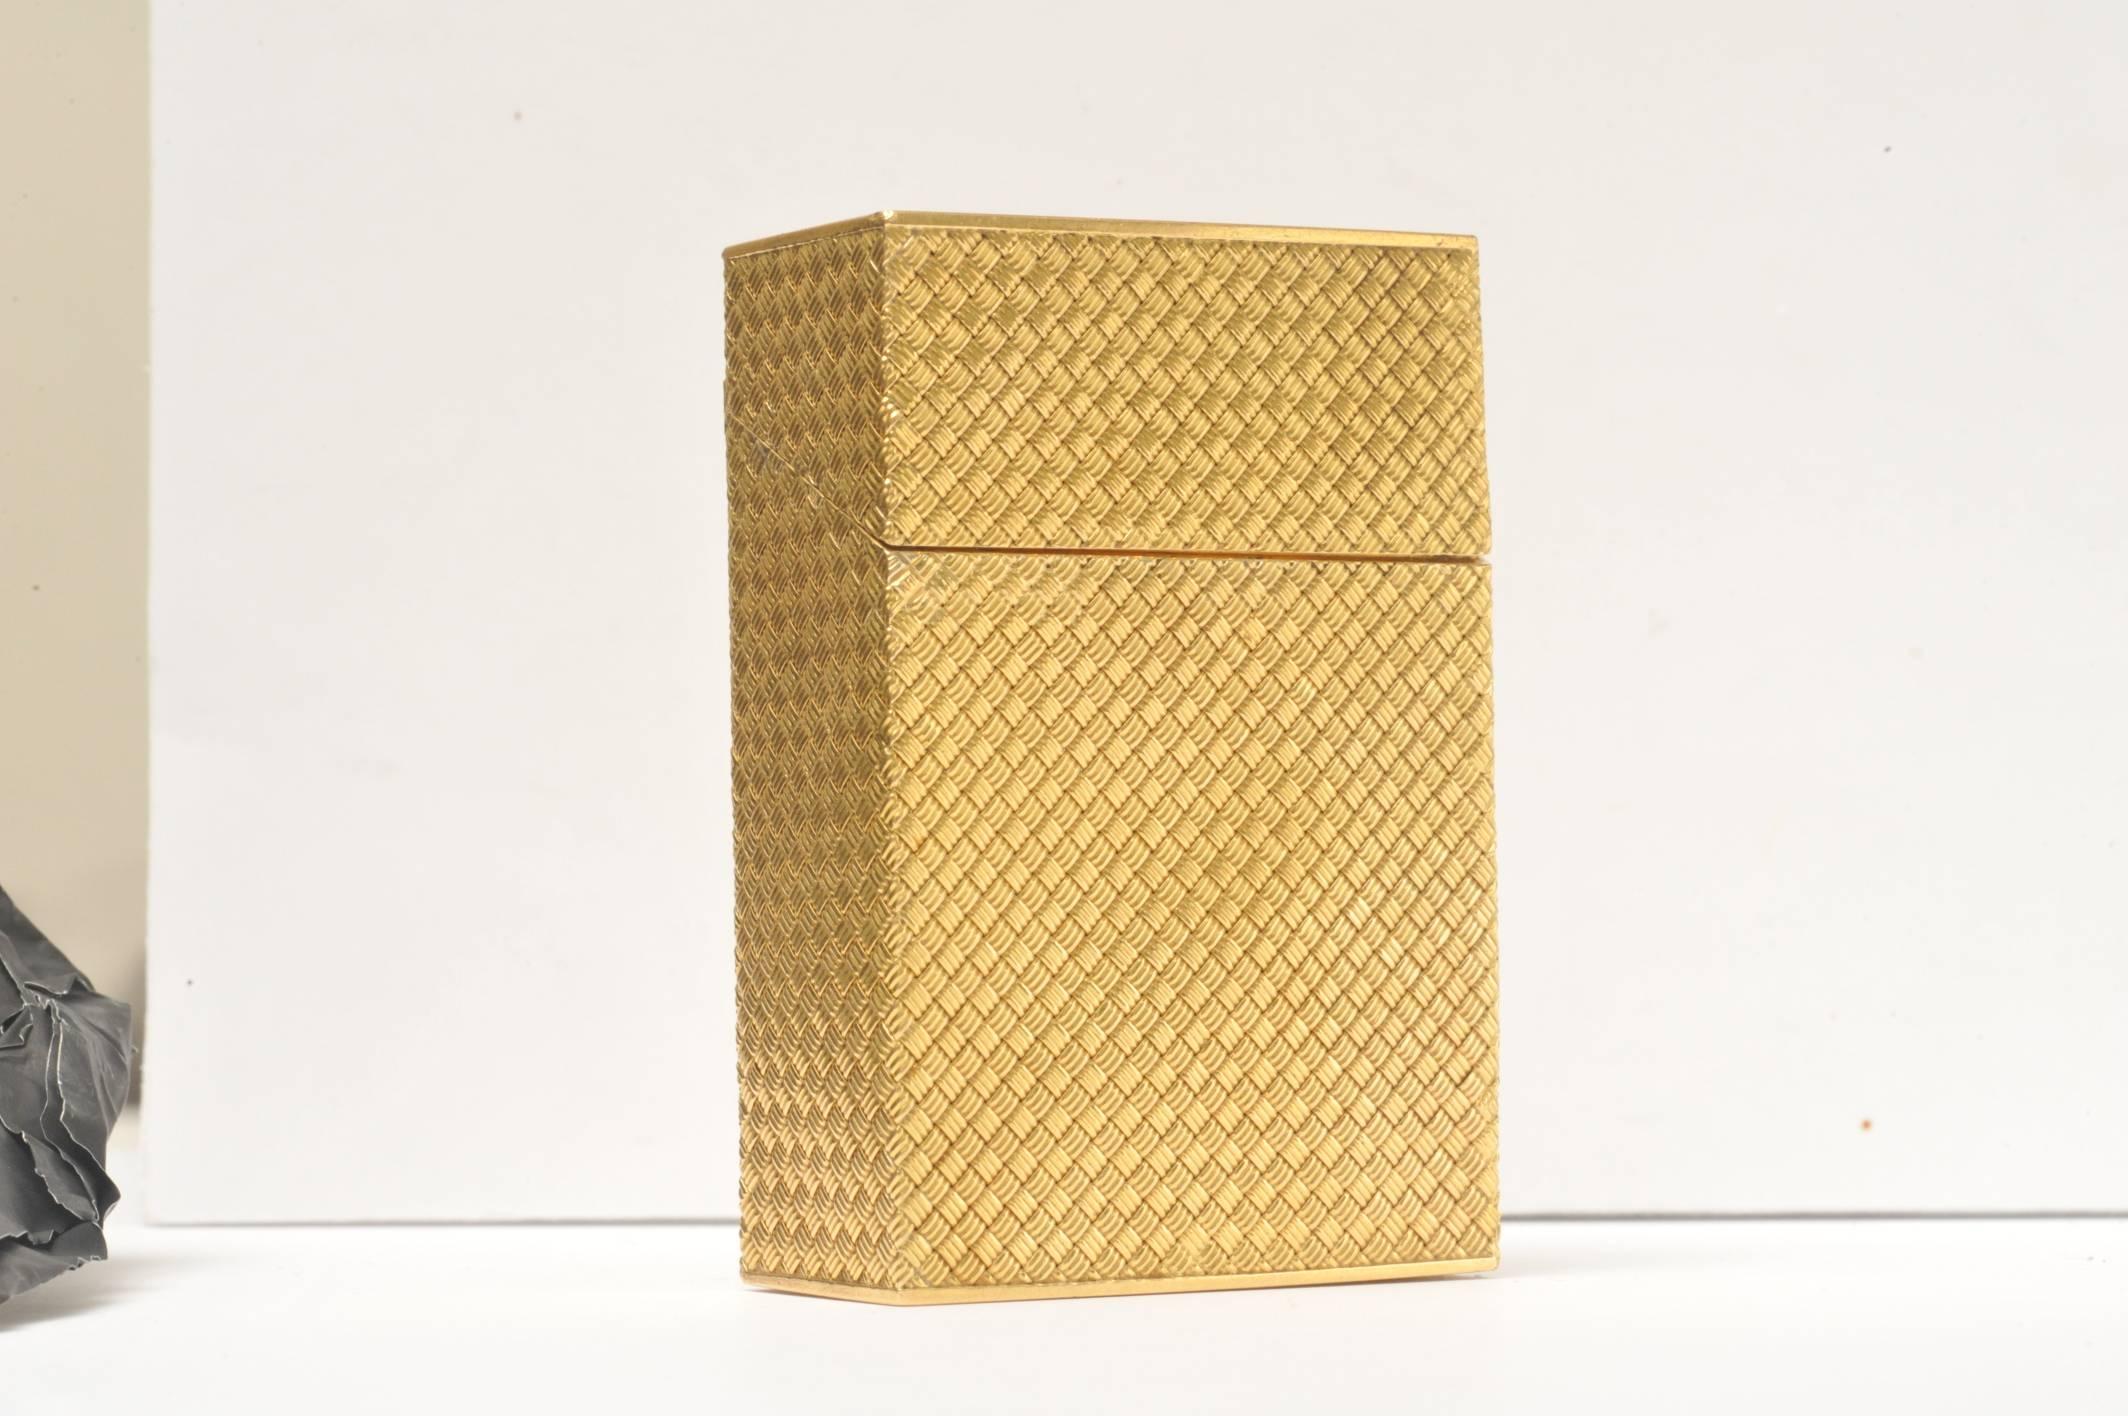 This solid 18K gold cigarette box in the basket weave design is a truly stunning piece.  The granulation work and detail is magnificent reminiscent of a bygone era.

Signature is there, but difficult to read.